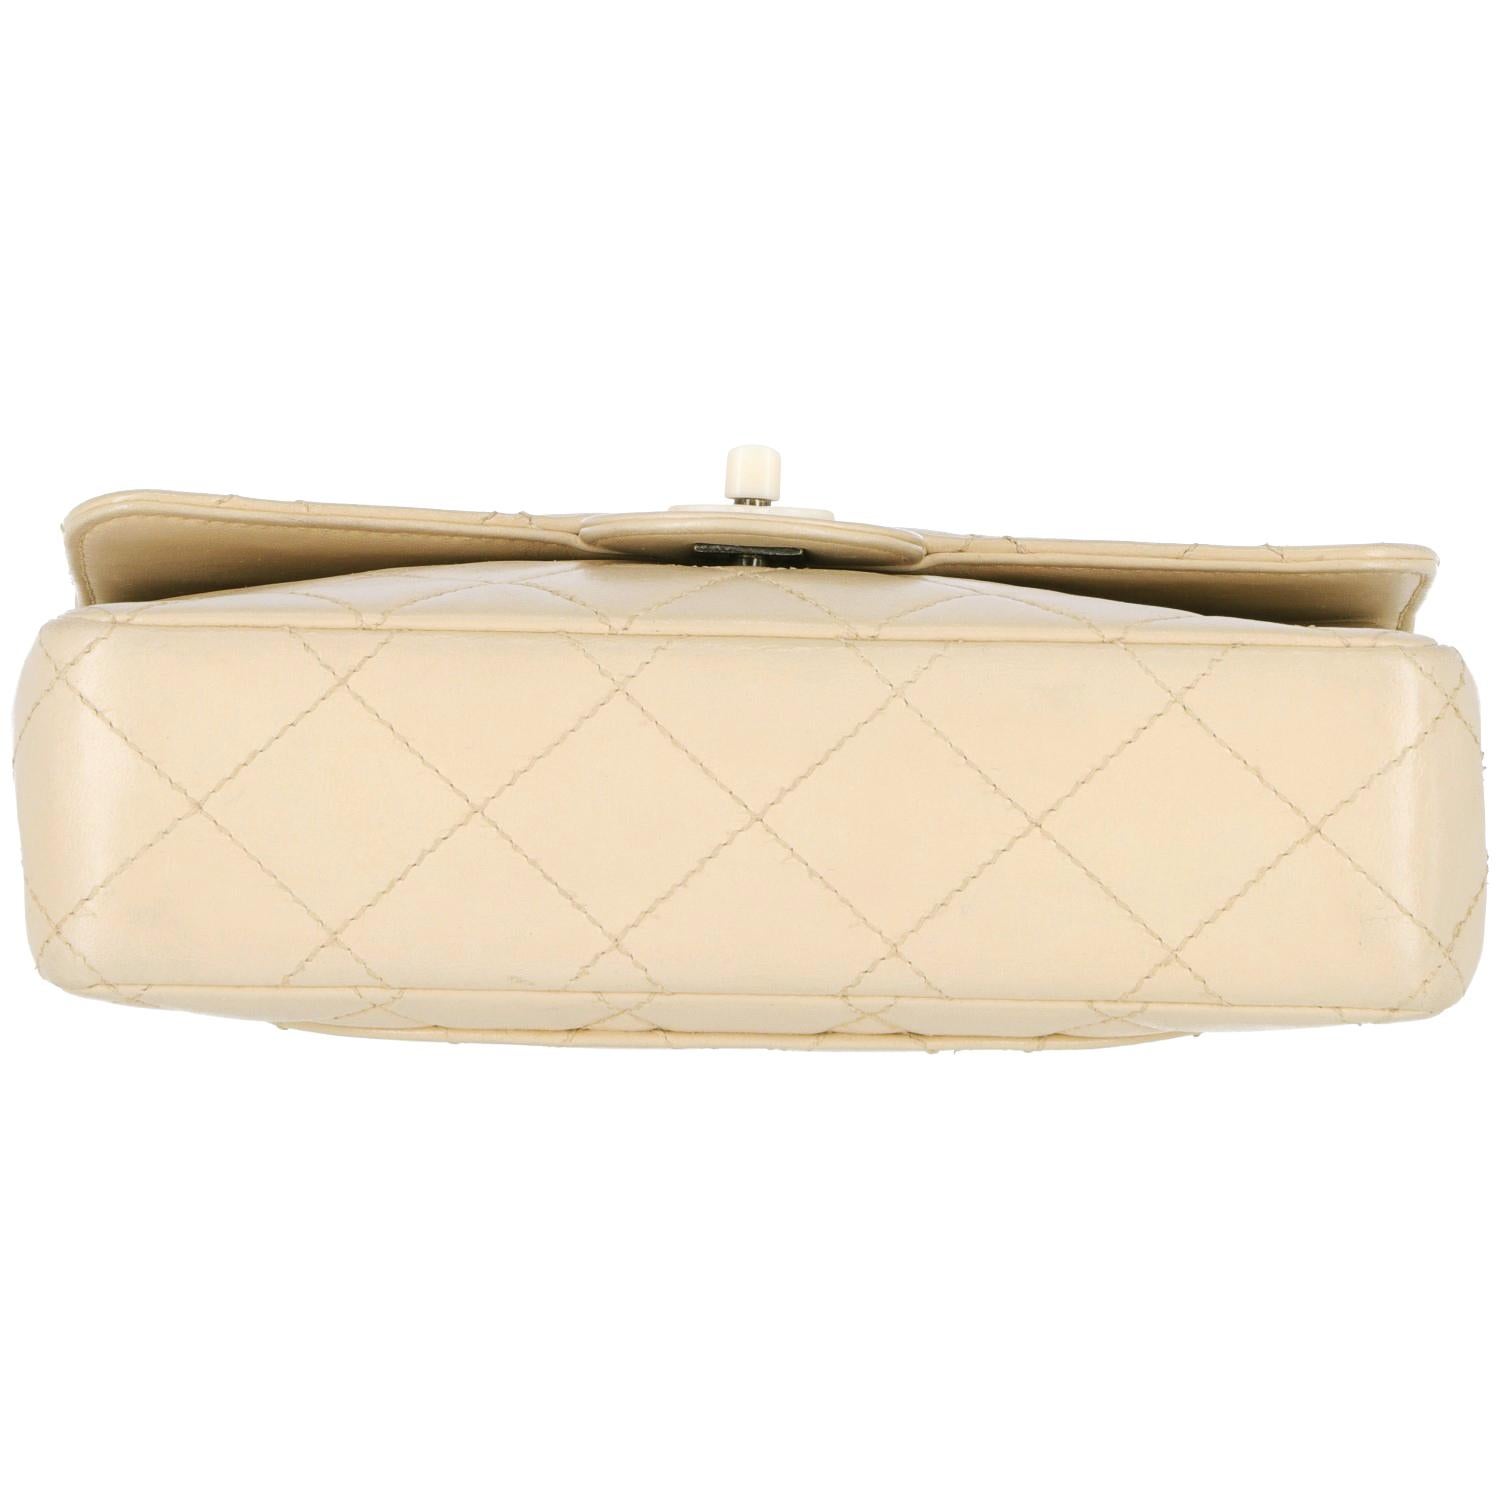 1990s Chanel beige leather bag  1